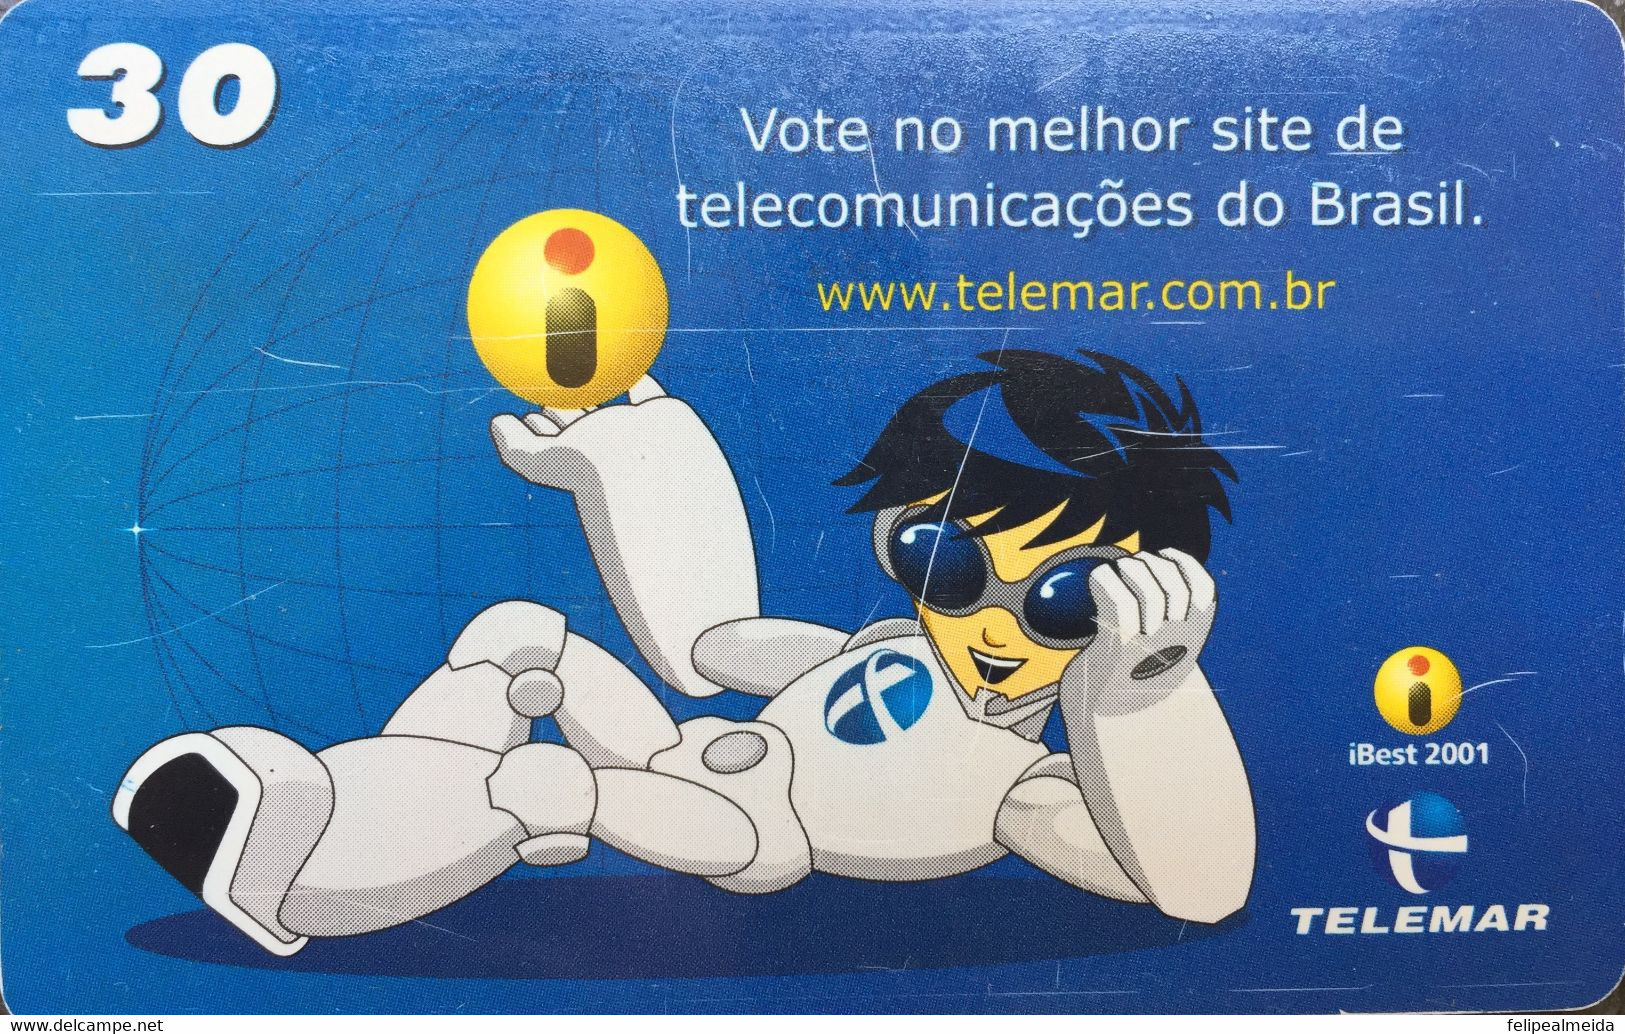 Phone Card Made By Telemar In 2001 - Telemar In The Ibest 2001 Award - The Biggest Award In The Brazilian Internet - Opérateurs Télécom